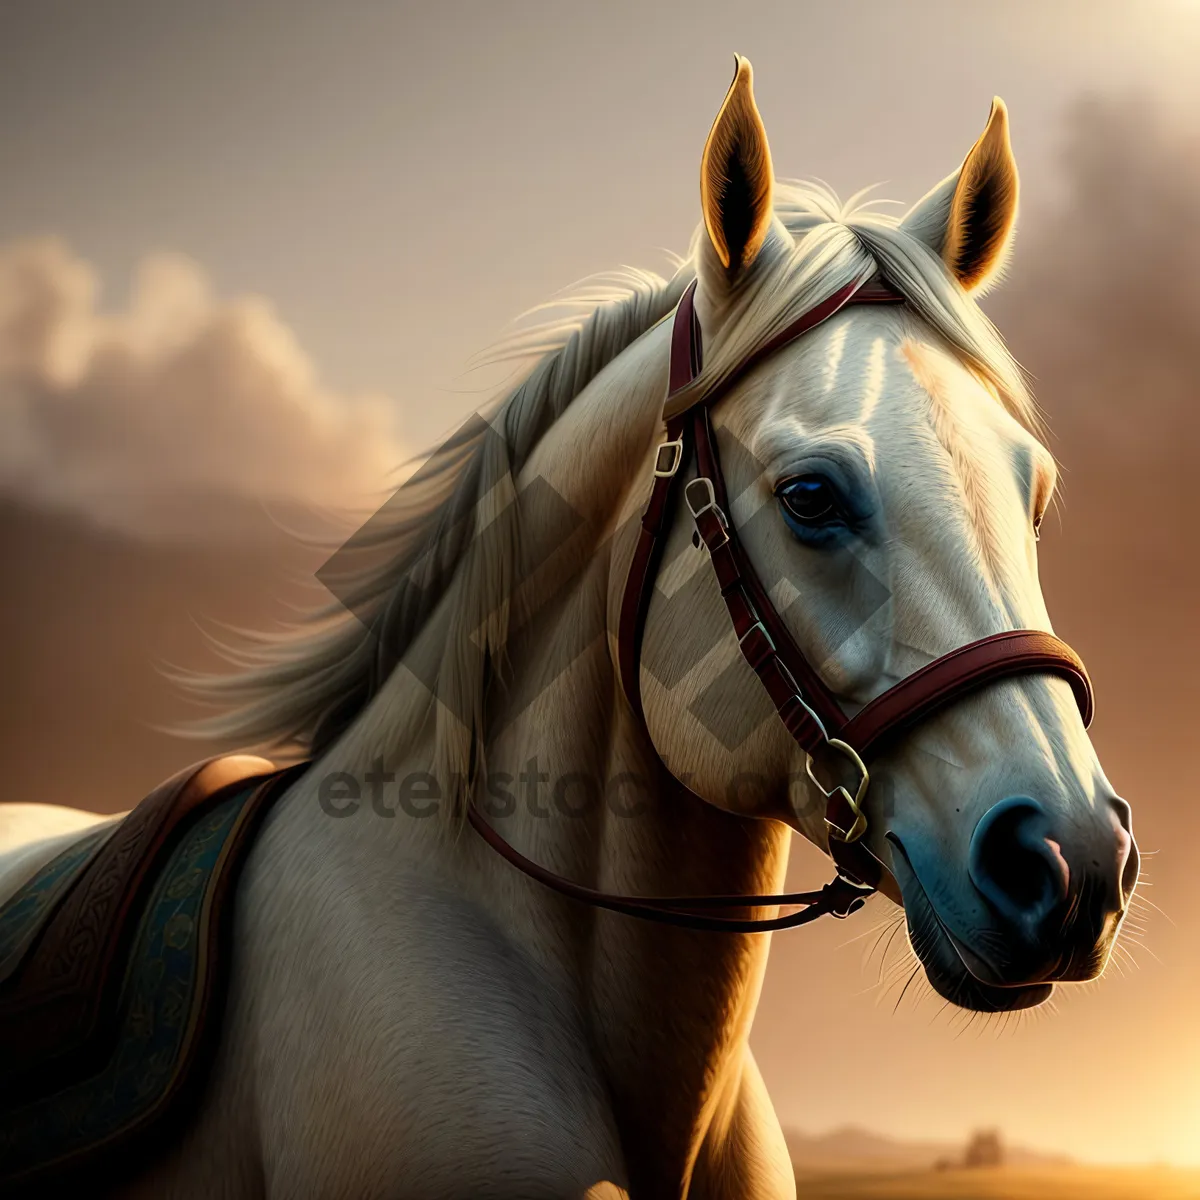 Picture of Thoroughbred Stallion Bristling with Equestrian Gear